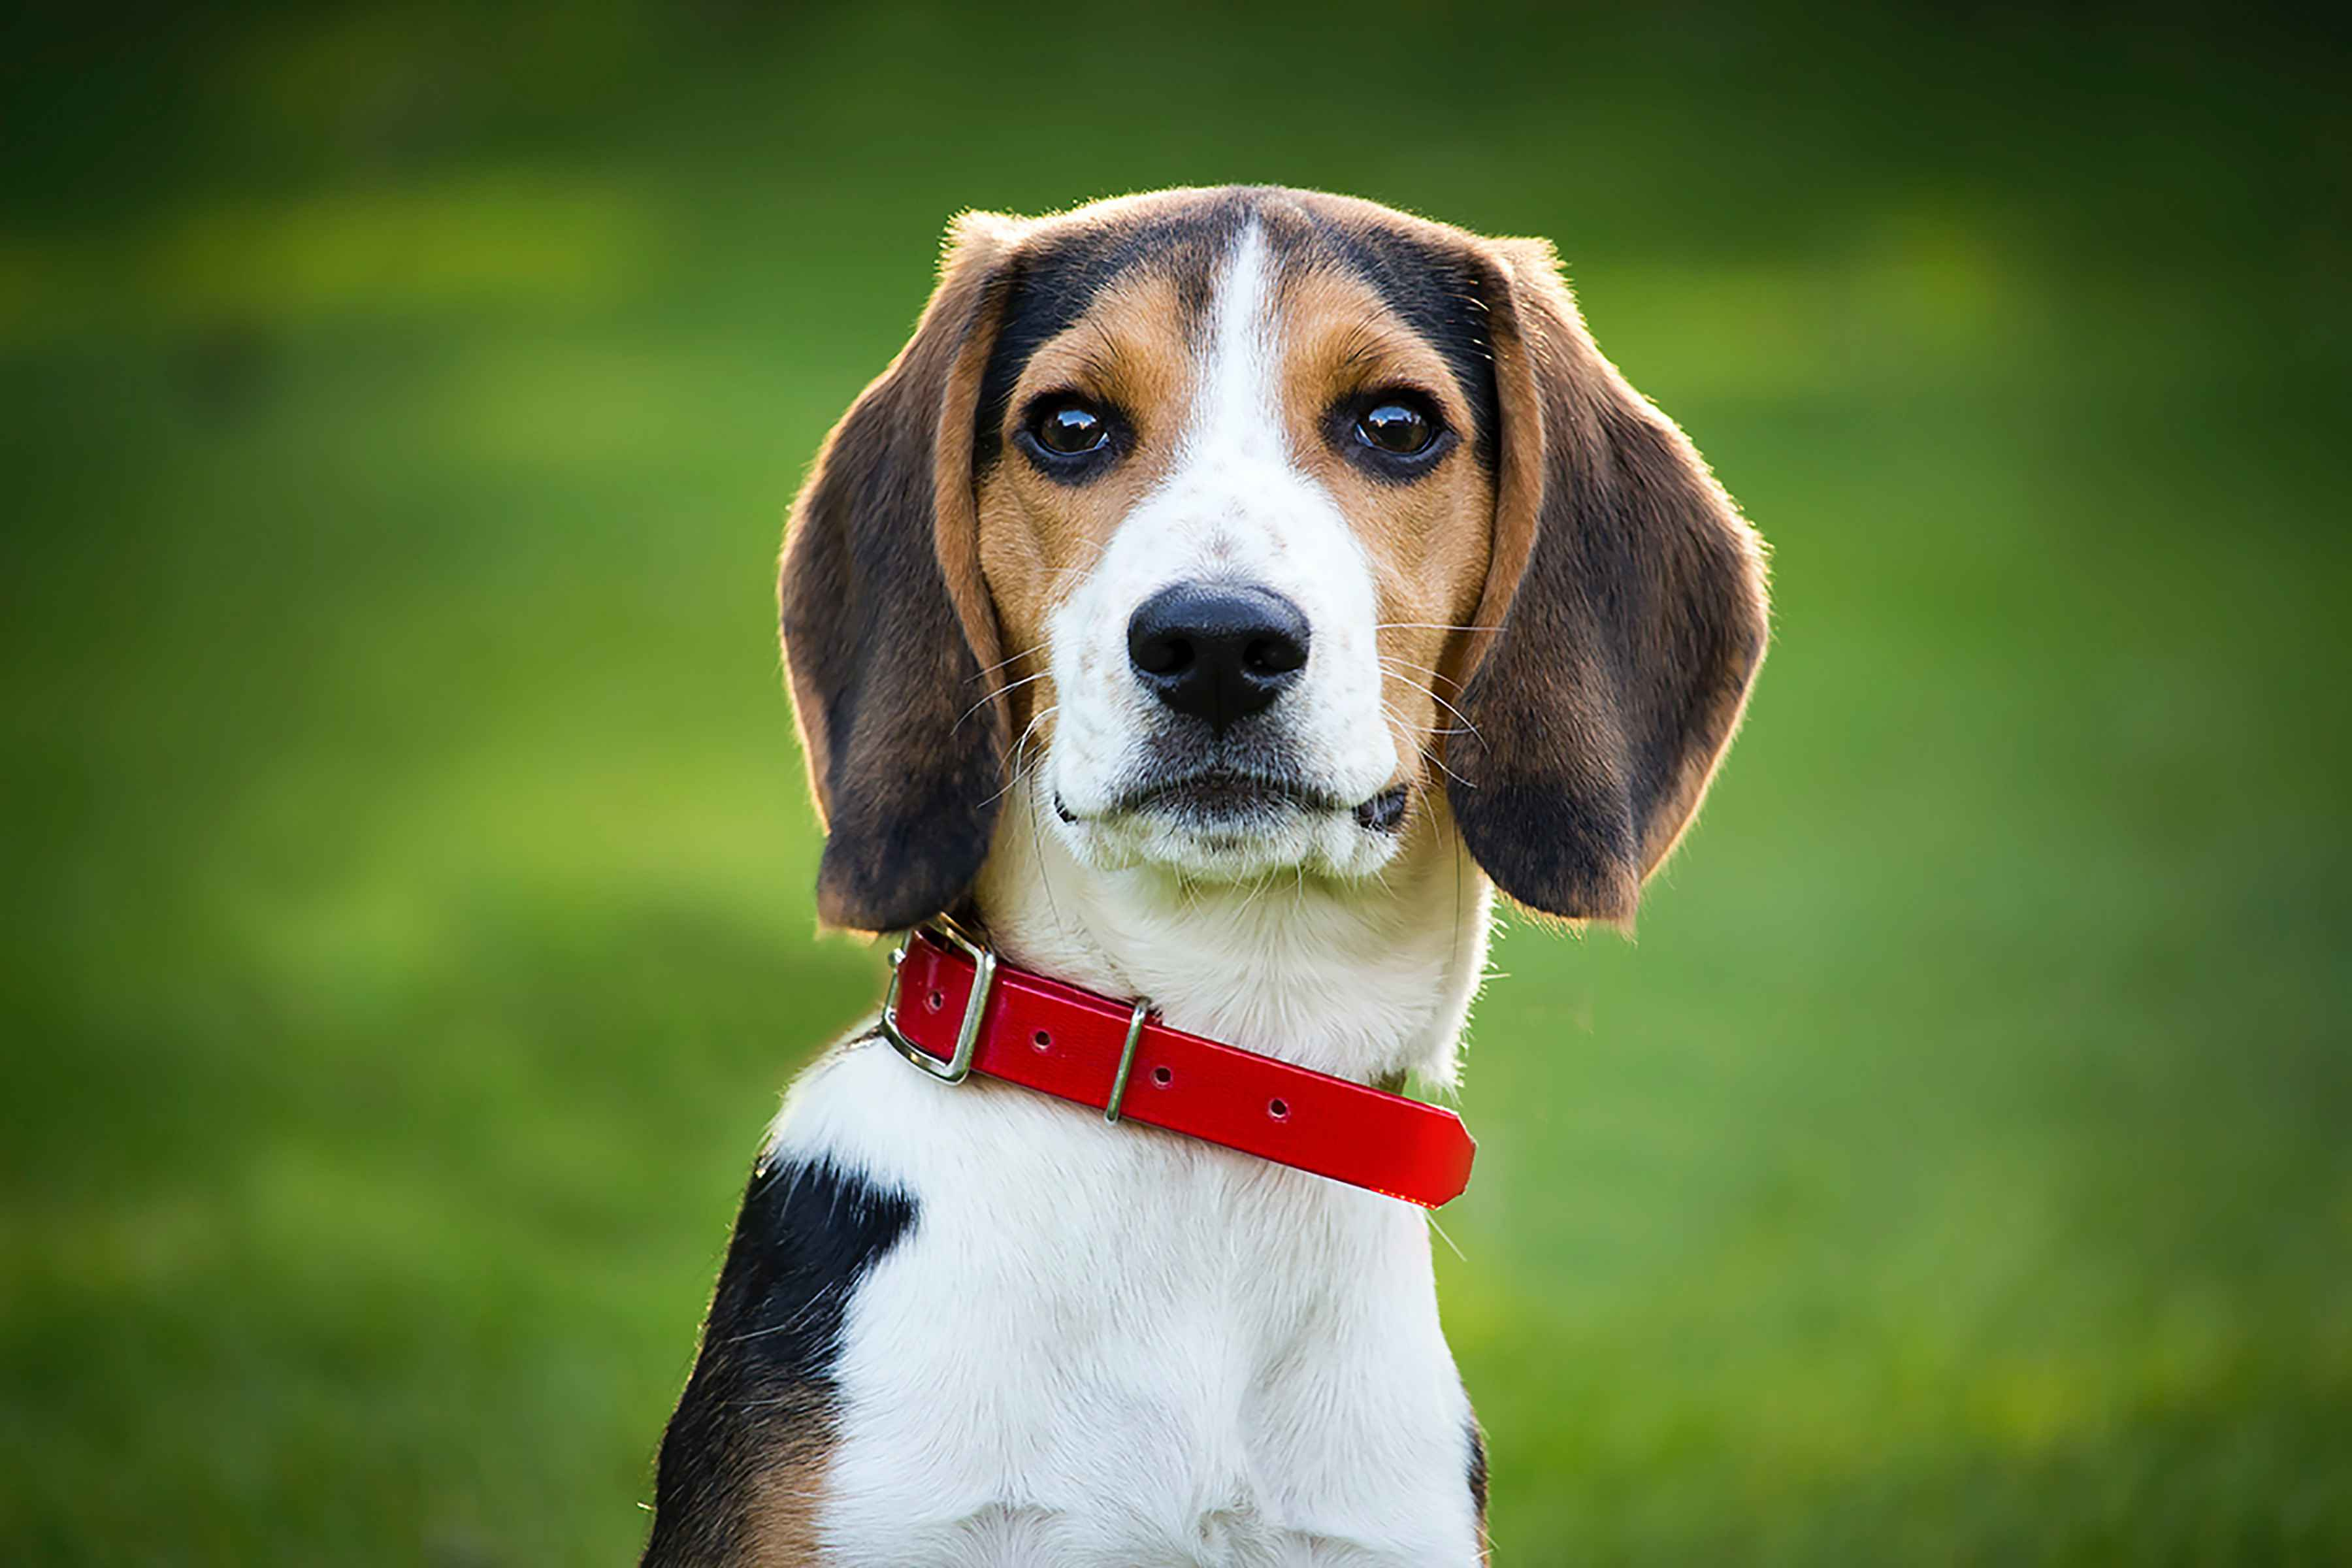 Beagle Space Requirements: How Much Room Does Your Beagle Need to Live Comfortably?